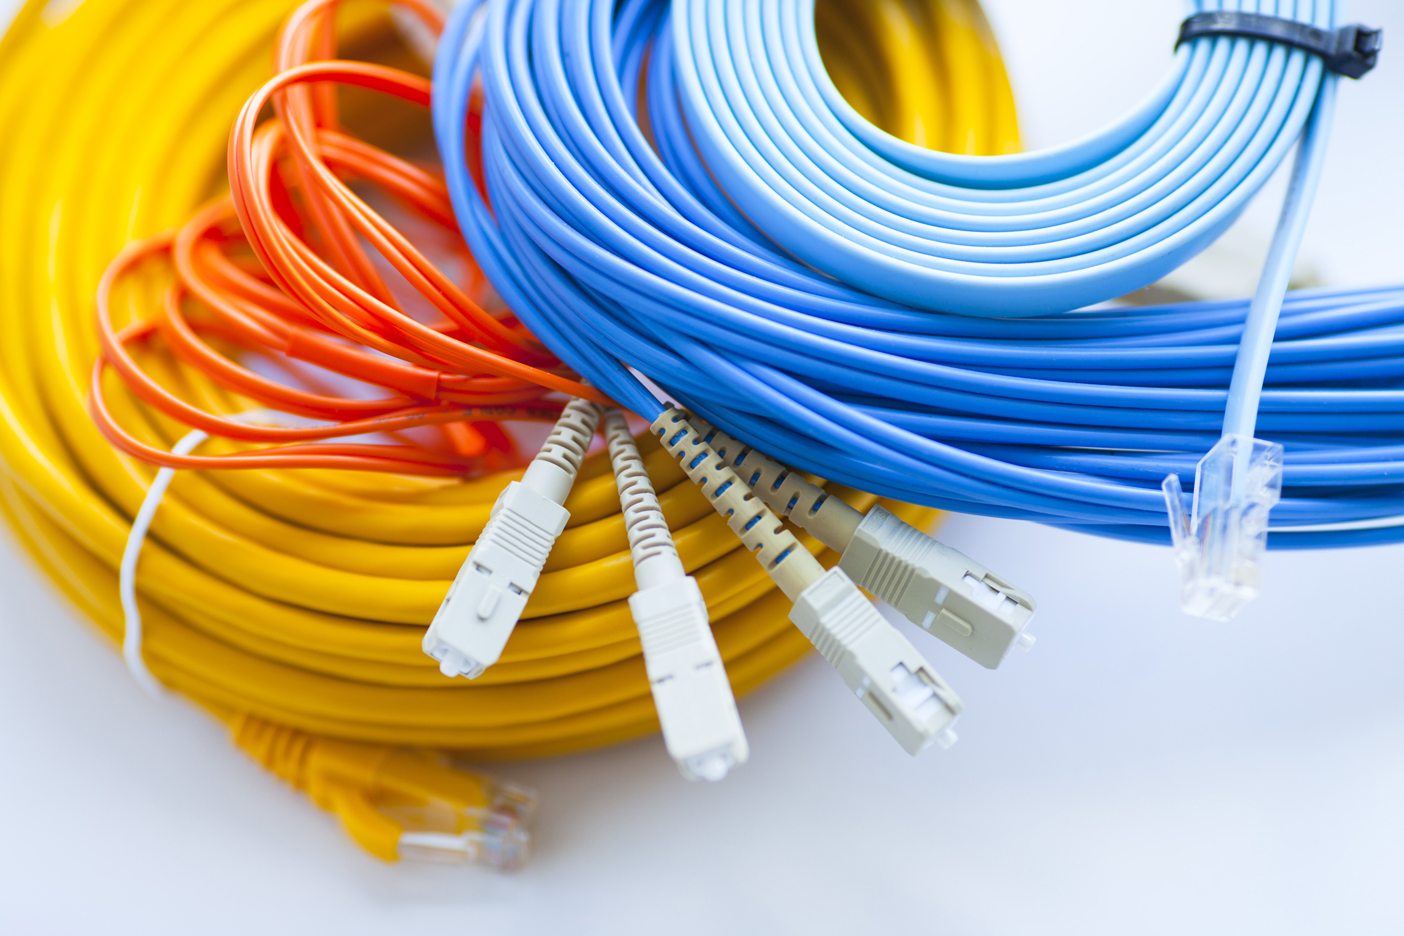 Types of Cabling in a Structured Cabling Environment